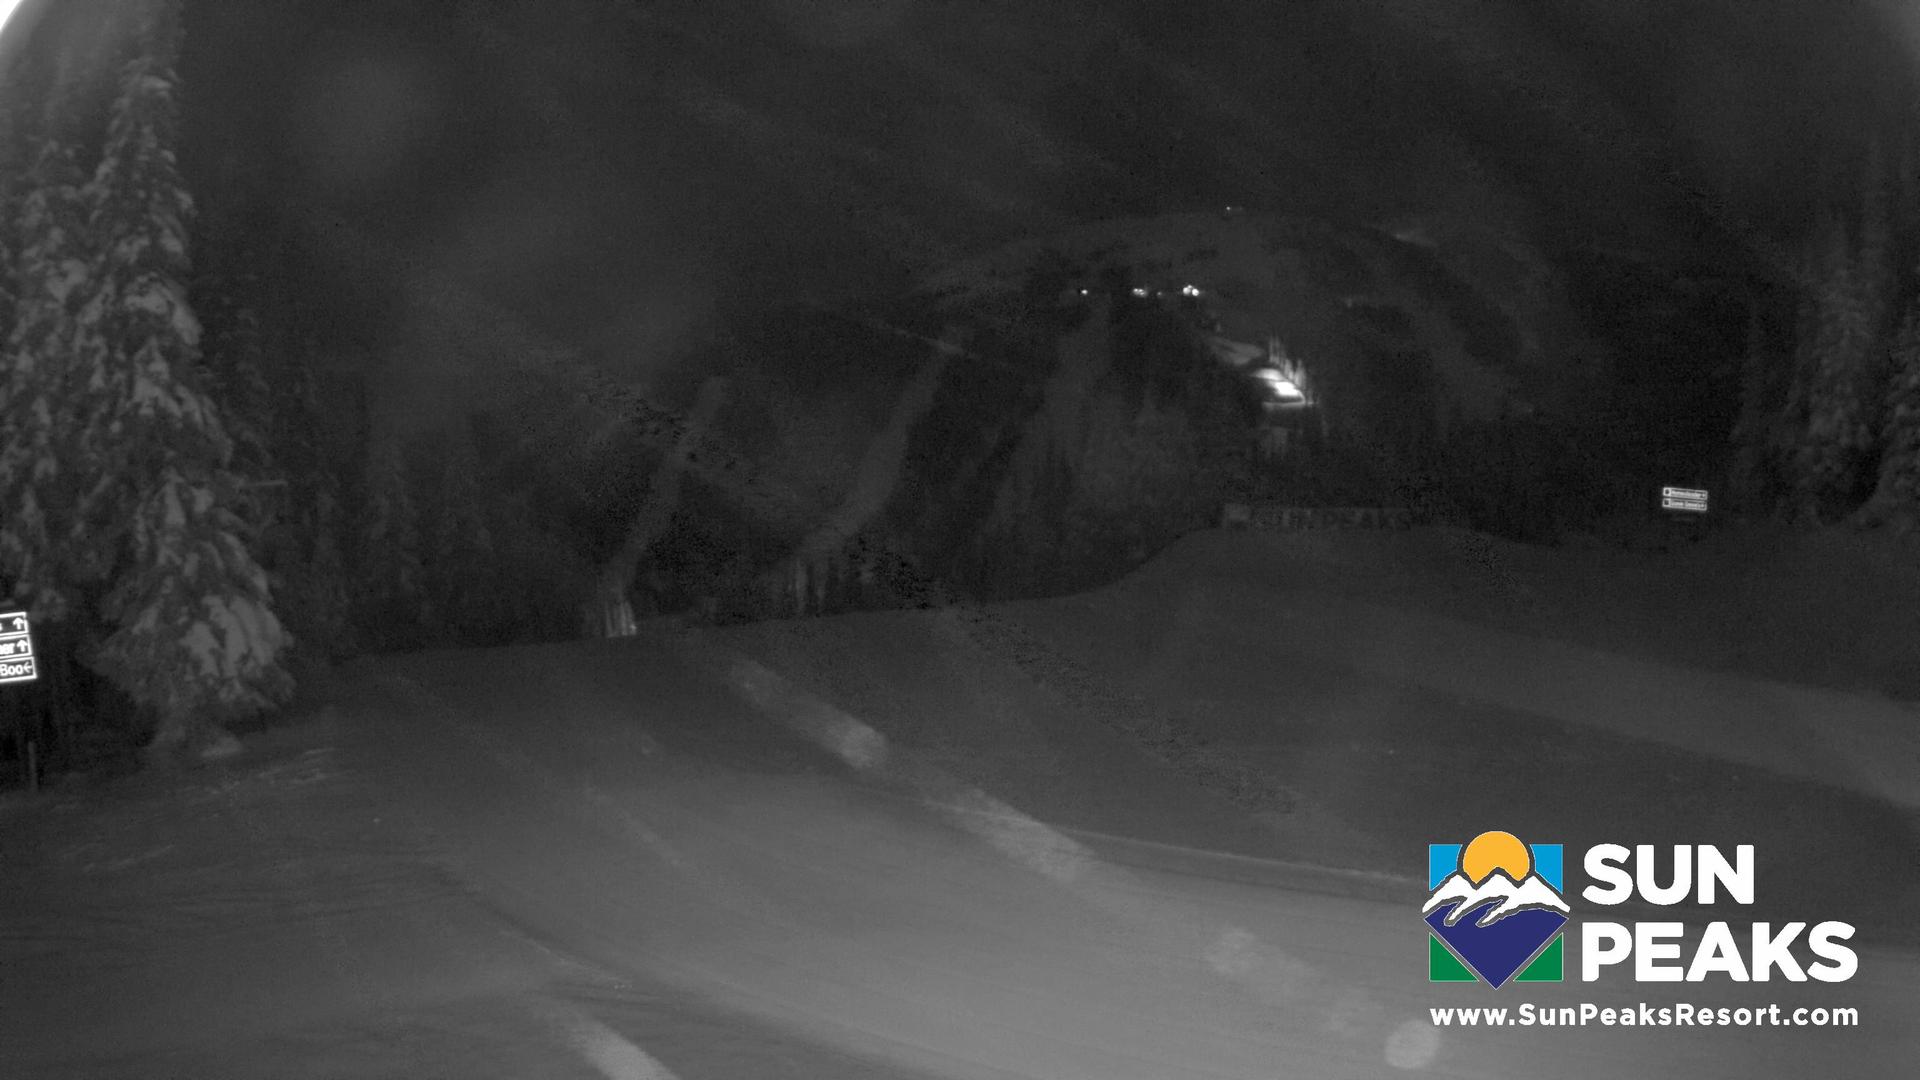 Traffic Cam Chase: Sun Peaks - Mt. Tod from the top of the Sundance Express